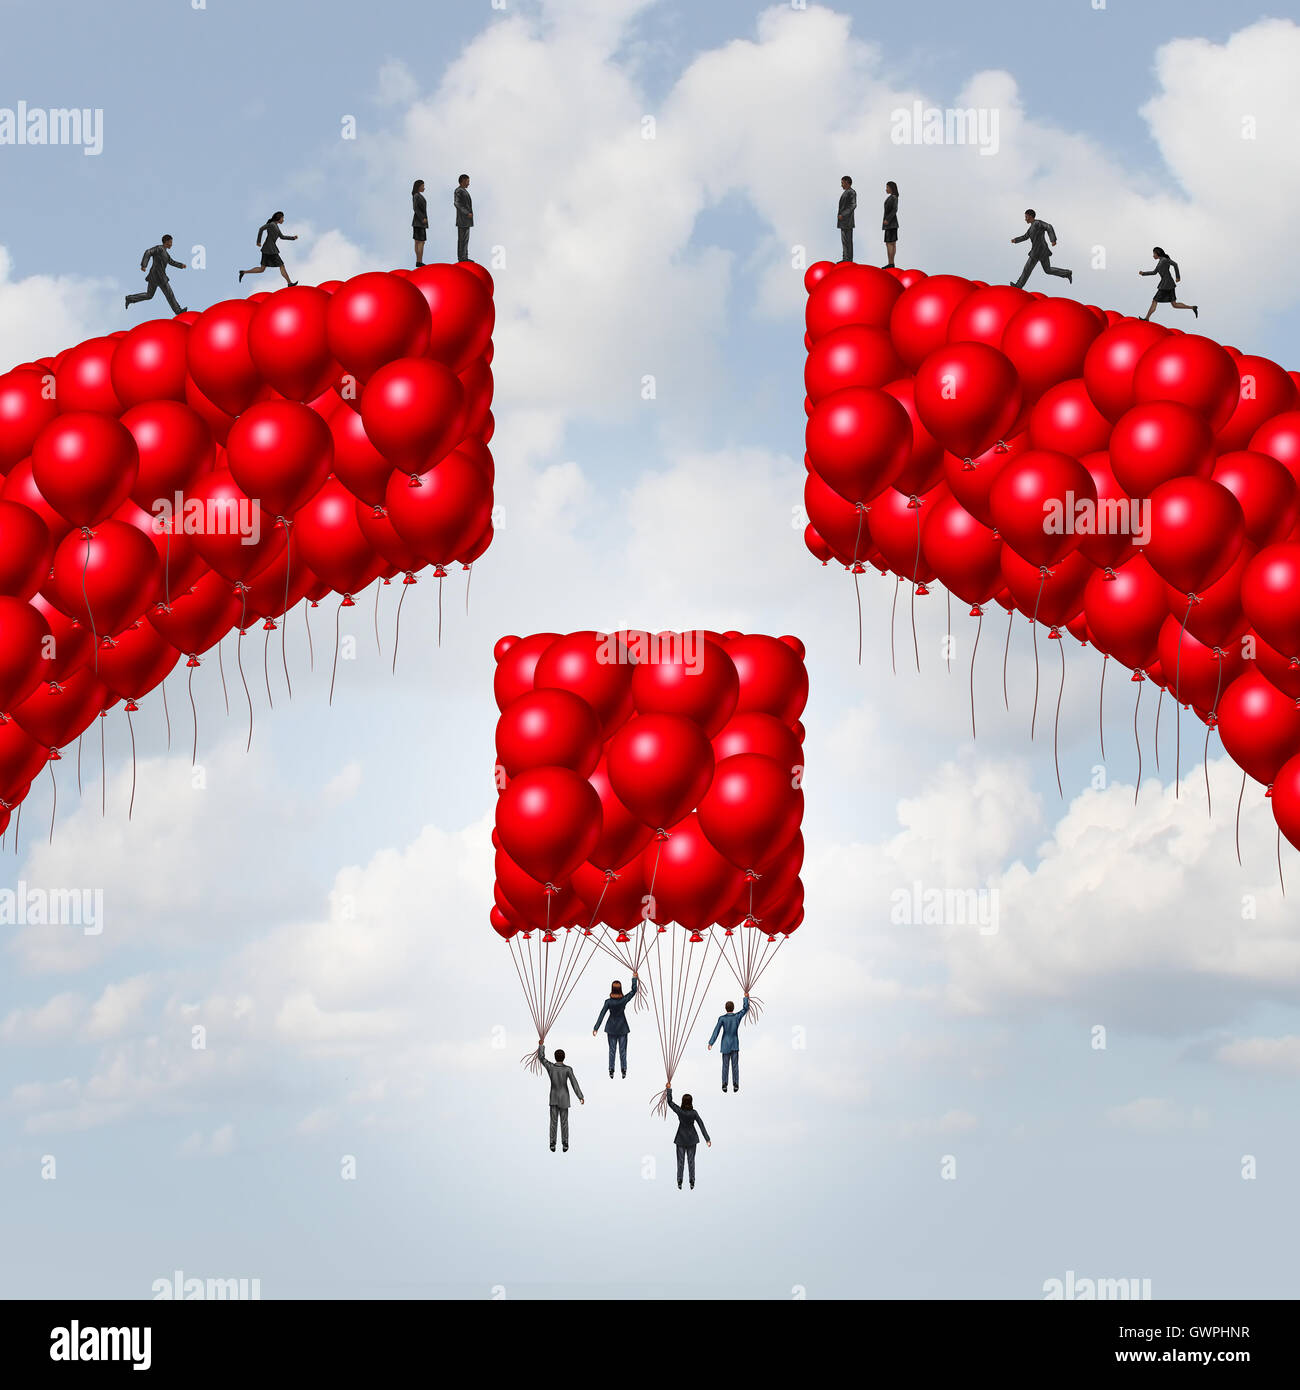 Management team business concept as a group of balloons shaped as a broken bridge with leaders rising up with a balloon collection bridging the gap as a solution metaphor for teamwork and global unity symbol with 3D illustration elements. Stock Photo